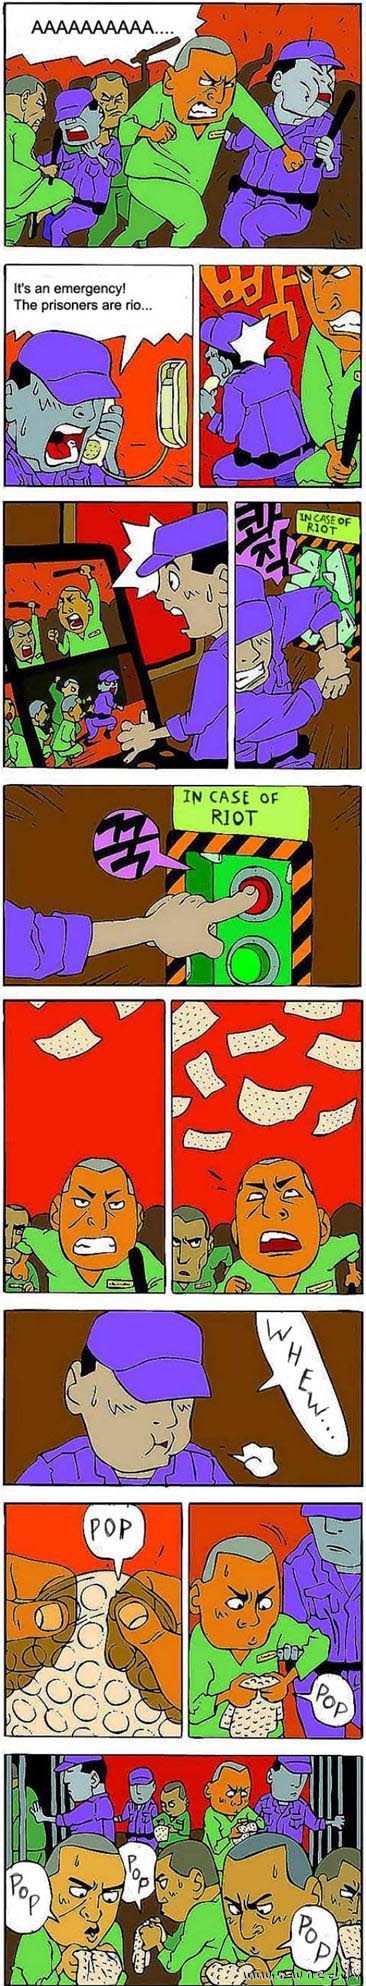 In case of riot